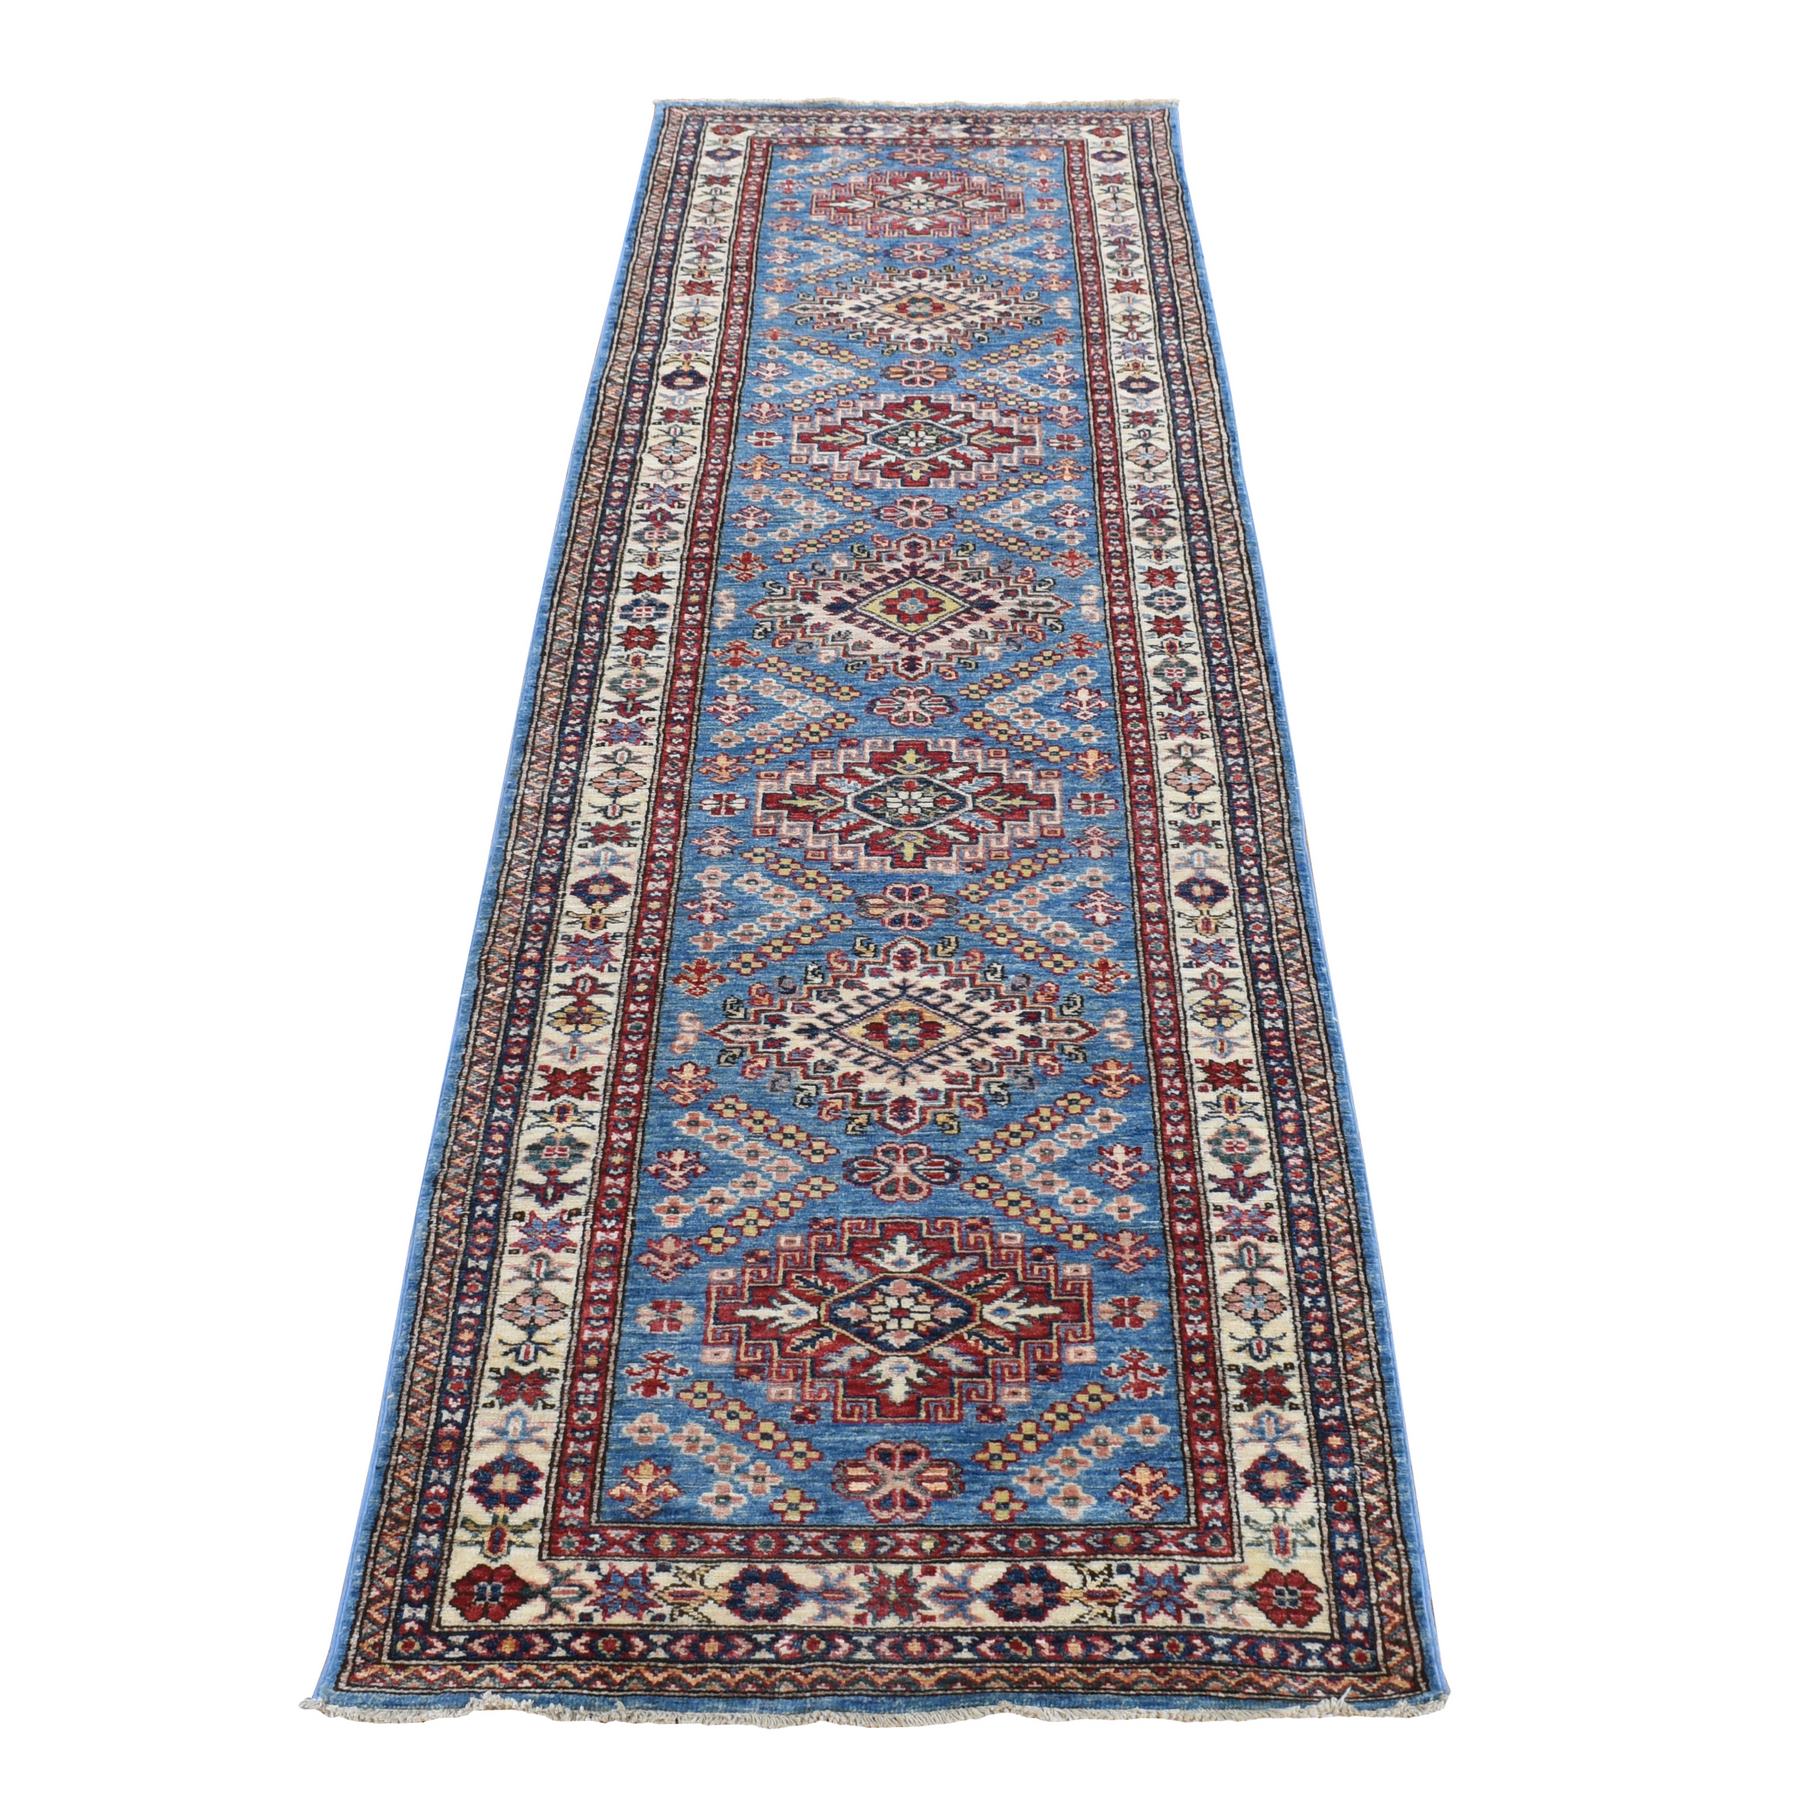  Wool Hand-Knotted Area Rug 2'8